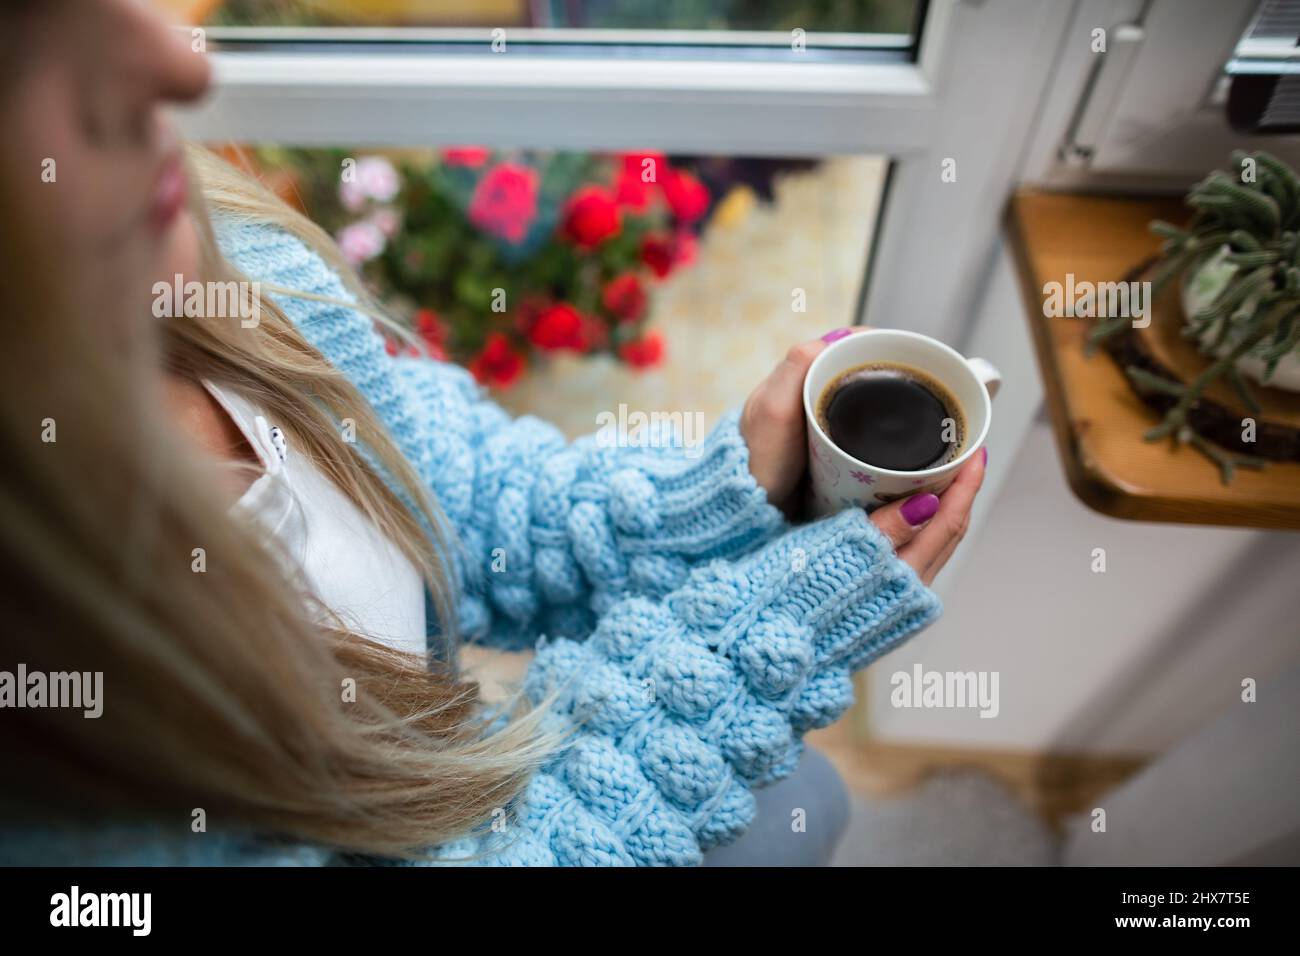 A woman warms her frozen hands against a mug of hot coffee. Stock Photo